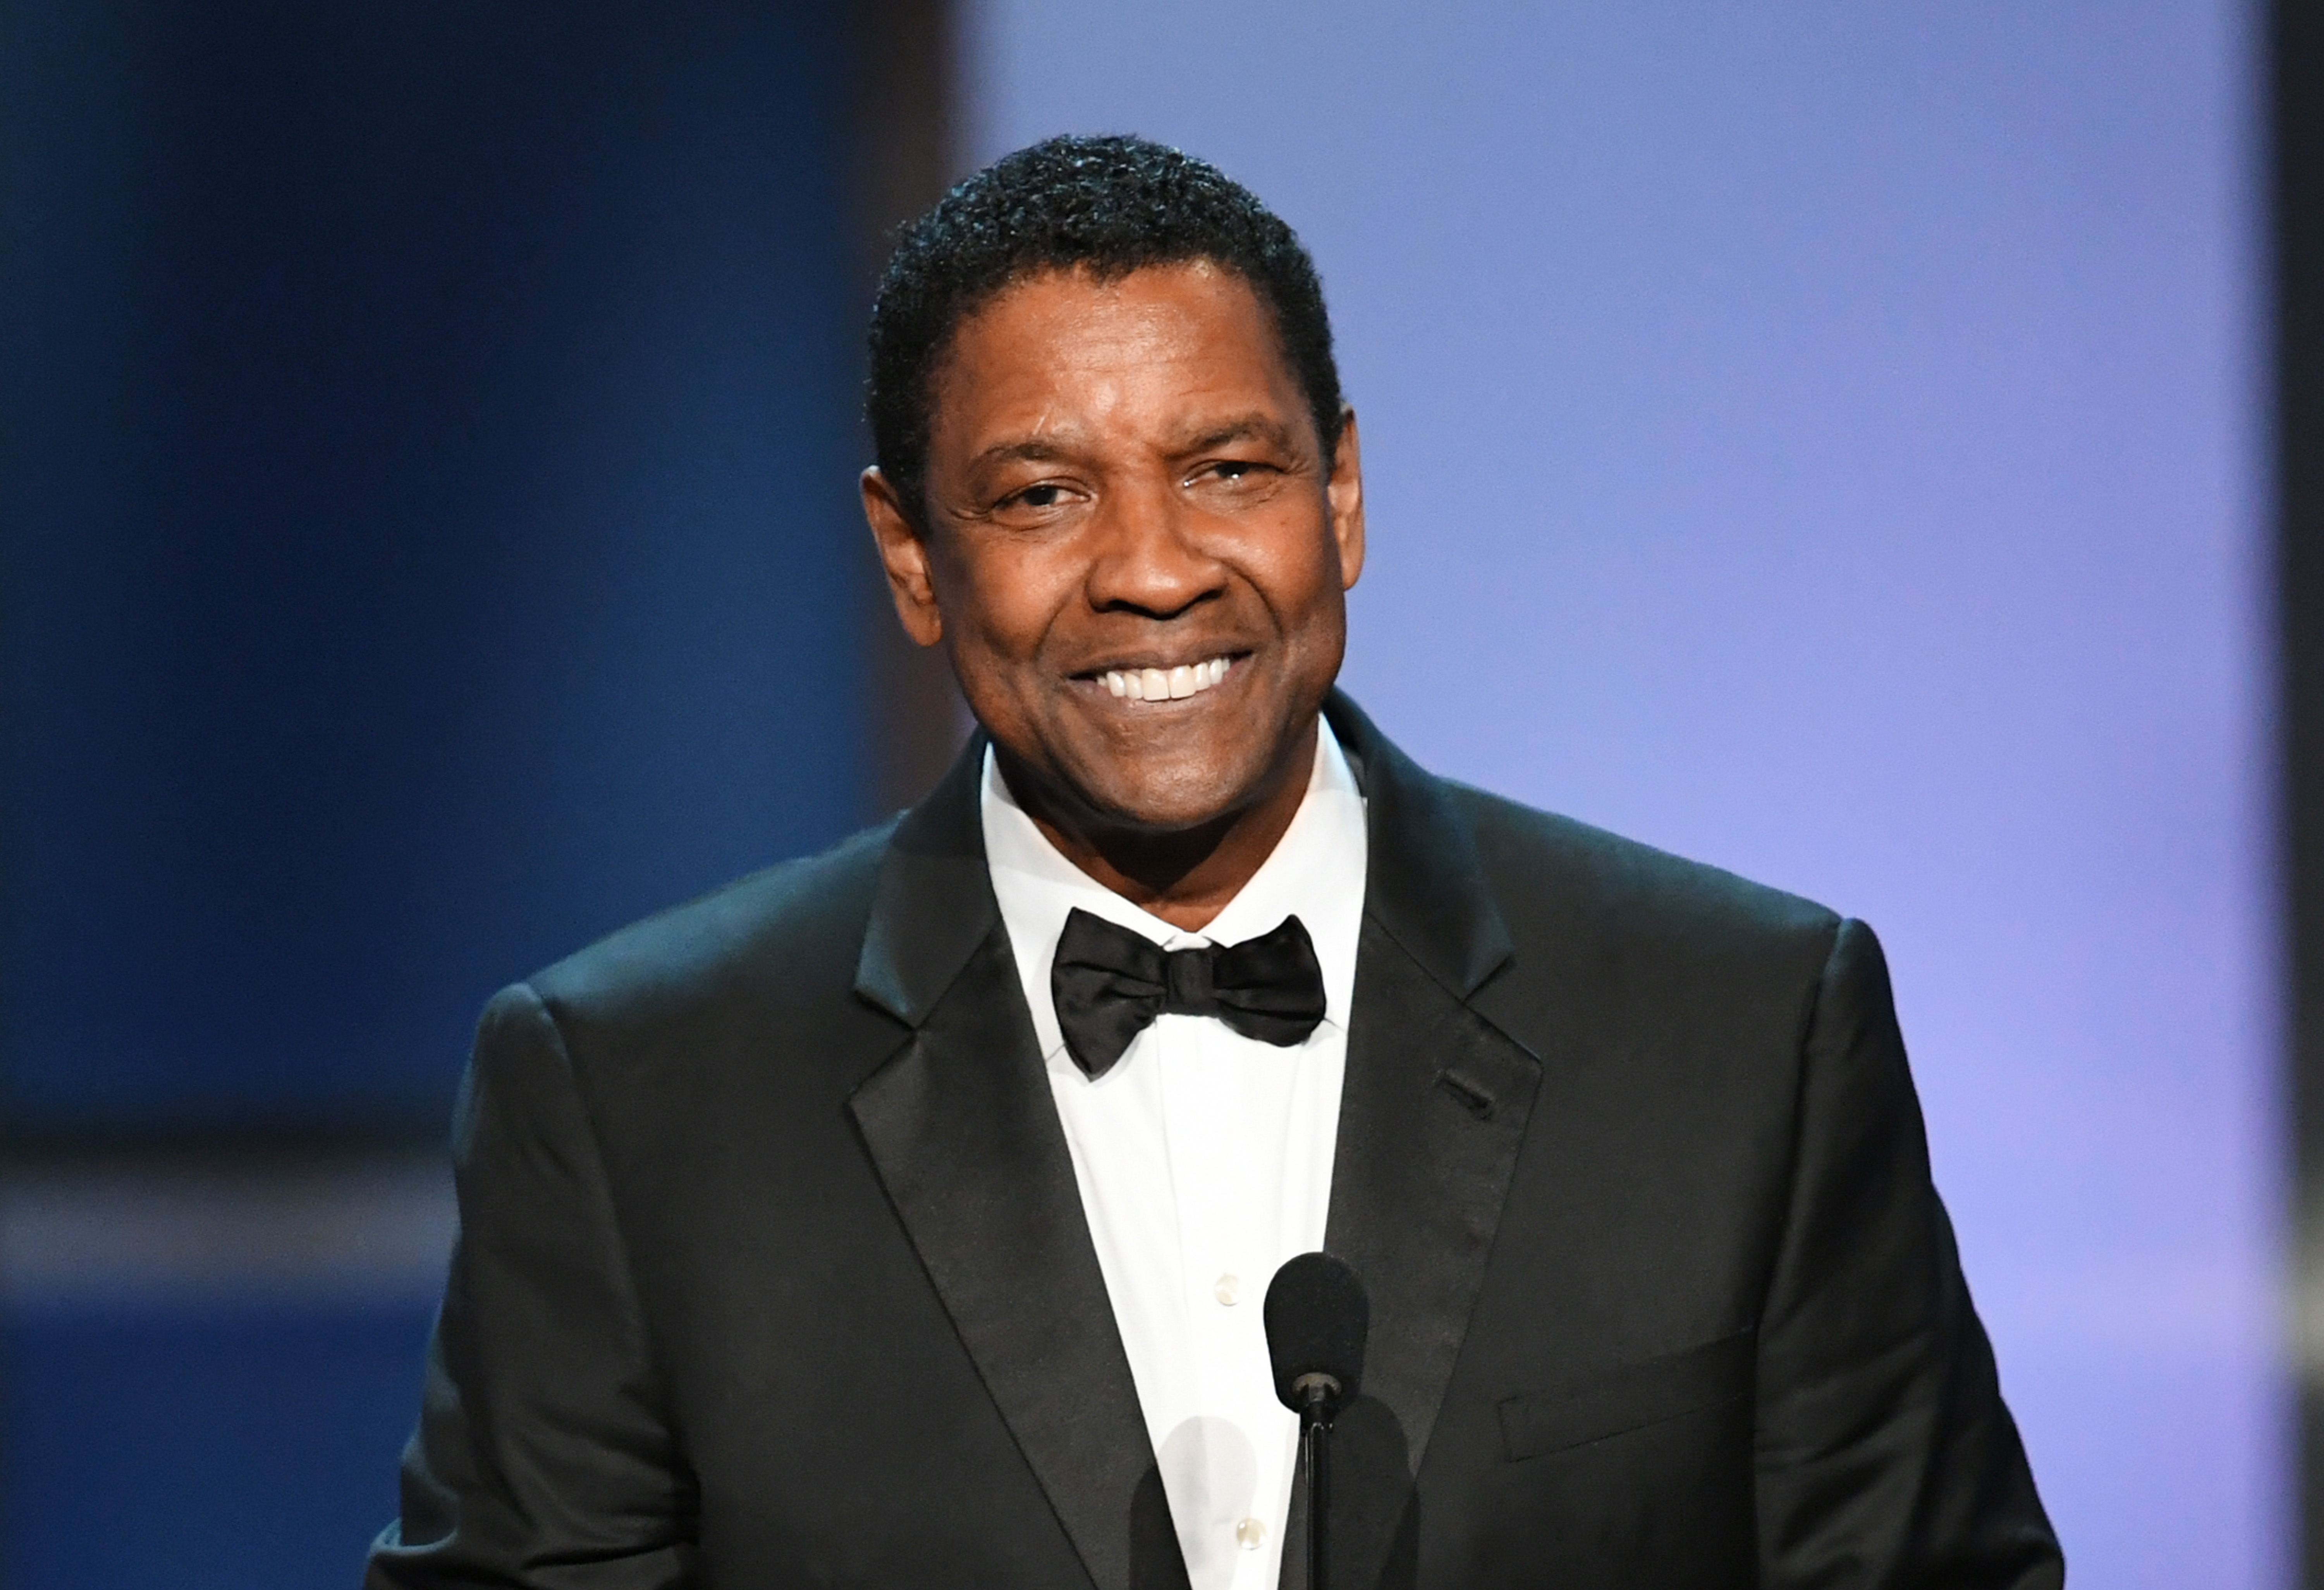 Denzel Washington speaks onstage during the 47th AFI Life Achievement Award honoring Denzel Washington at Dolby Theatre on June 06, 2019 in Hollywood, California. | Source: Getty Images